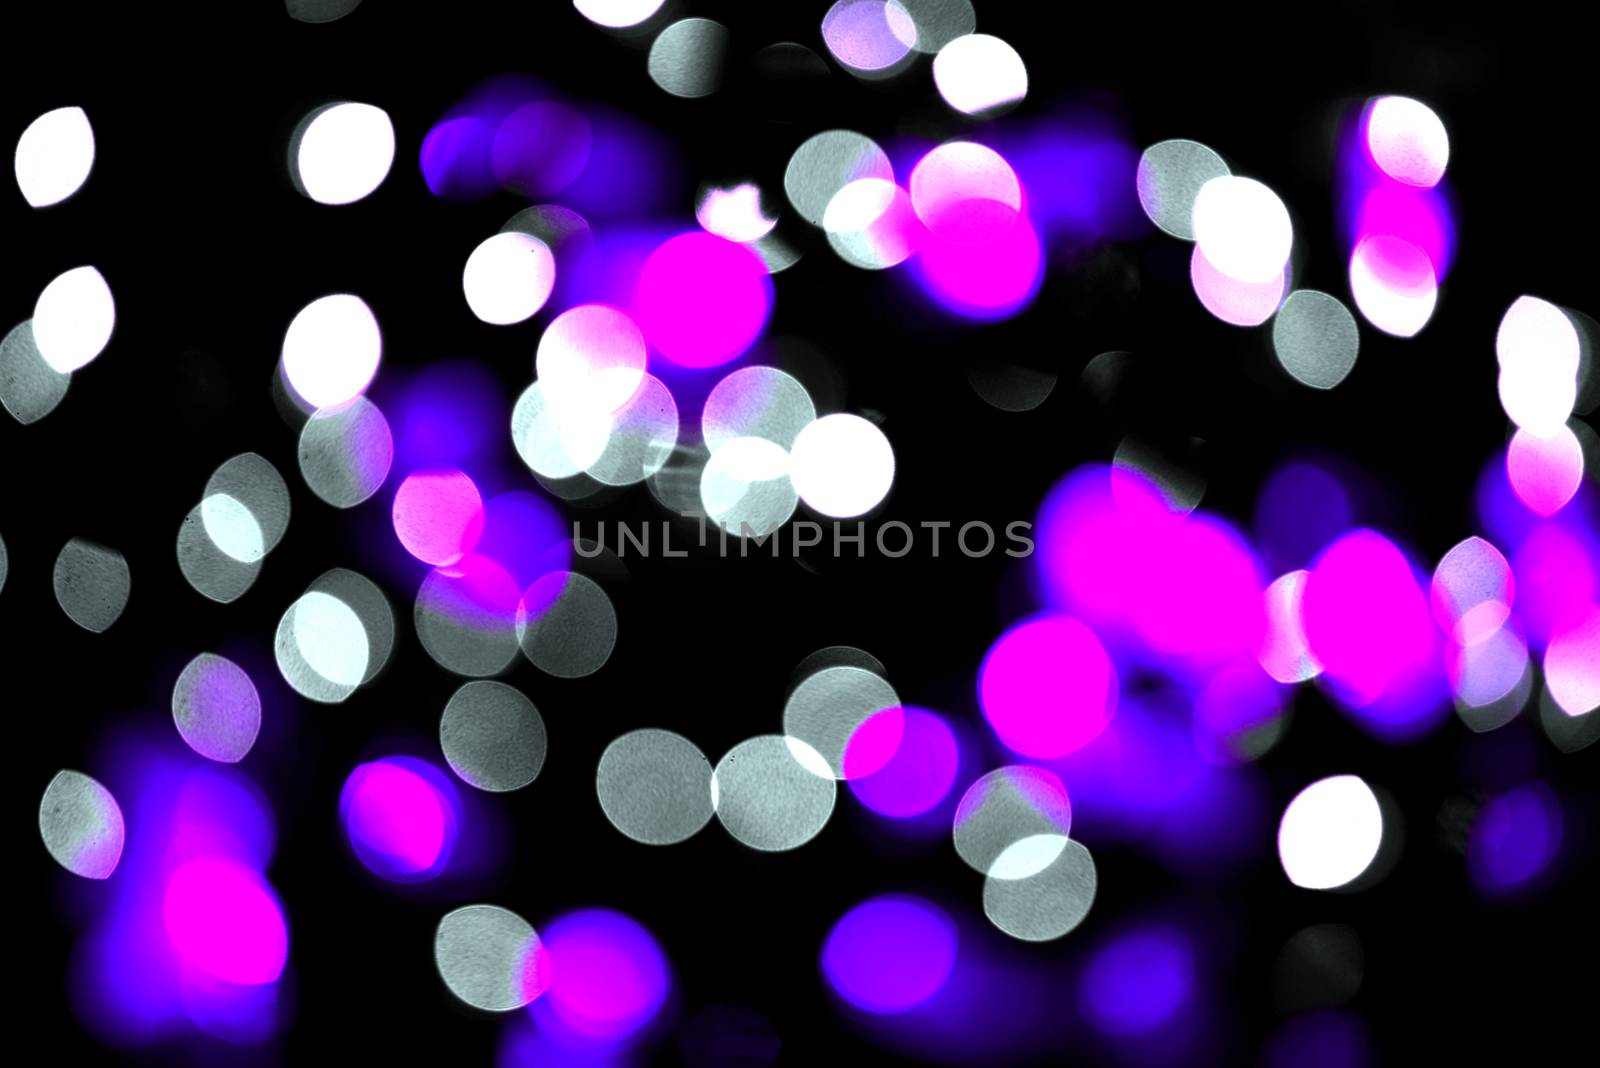 background with pink and purple light blurs
